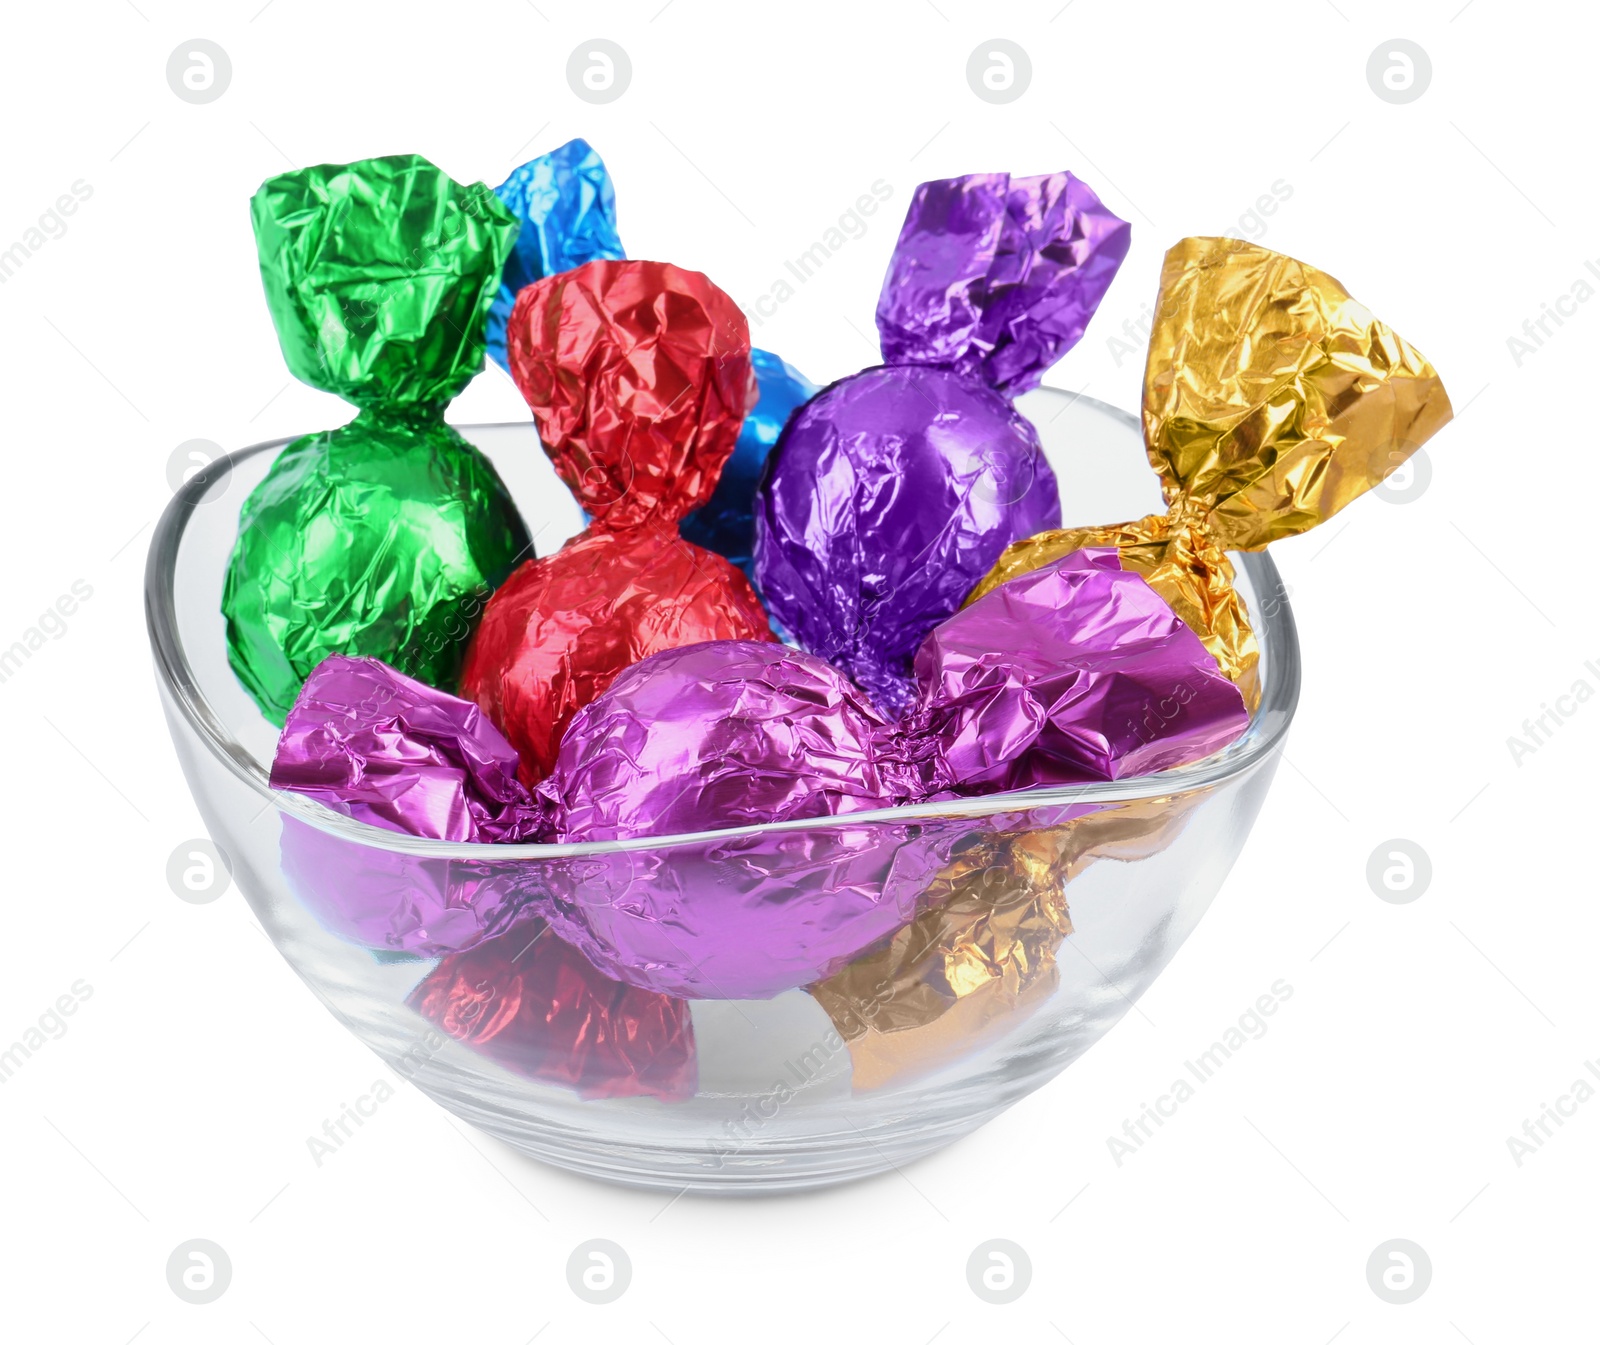 Photo of Bowl with many tasty candies in colorful wrappers isolated on white